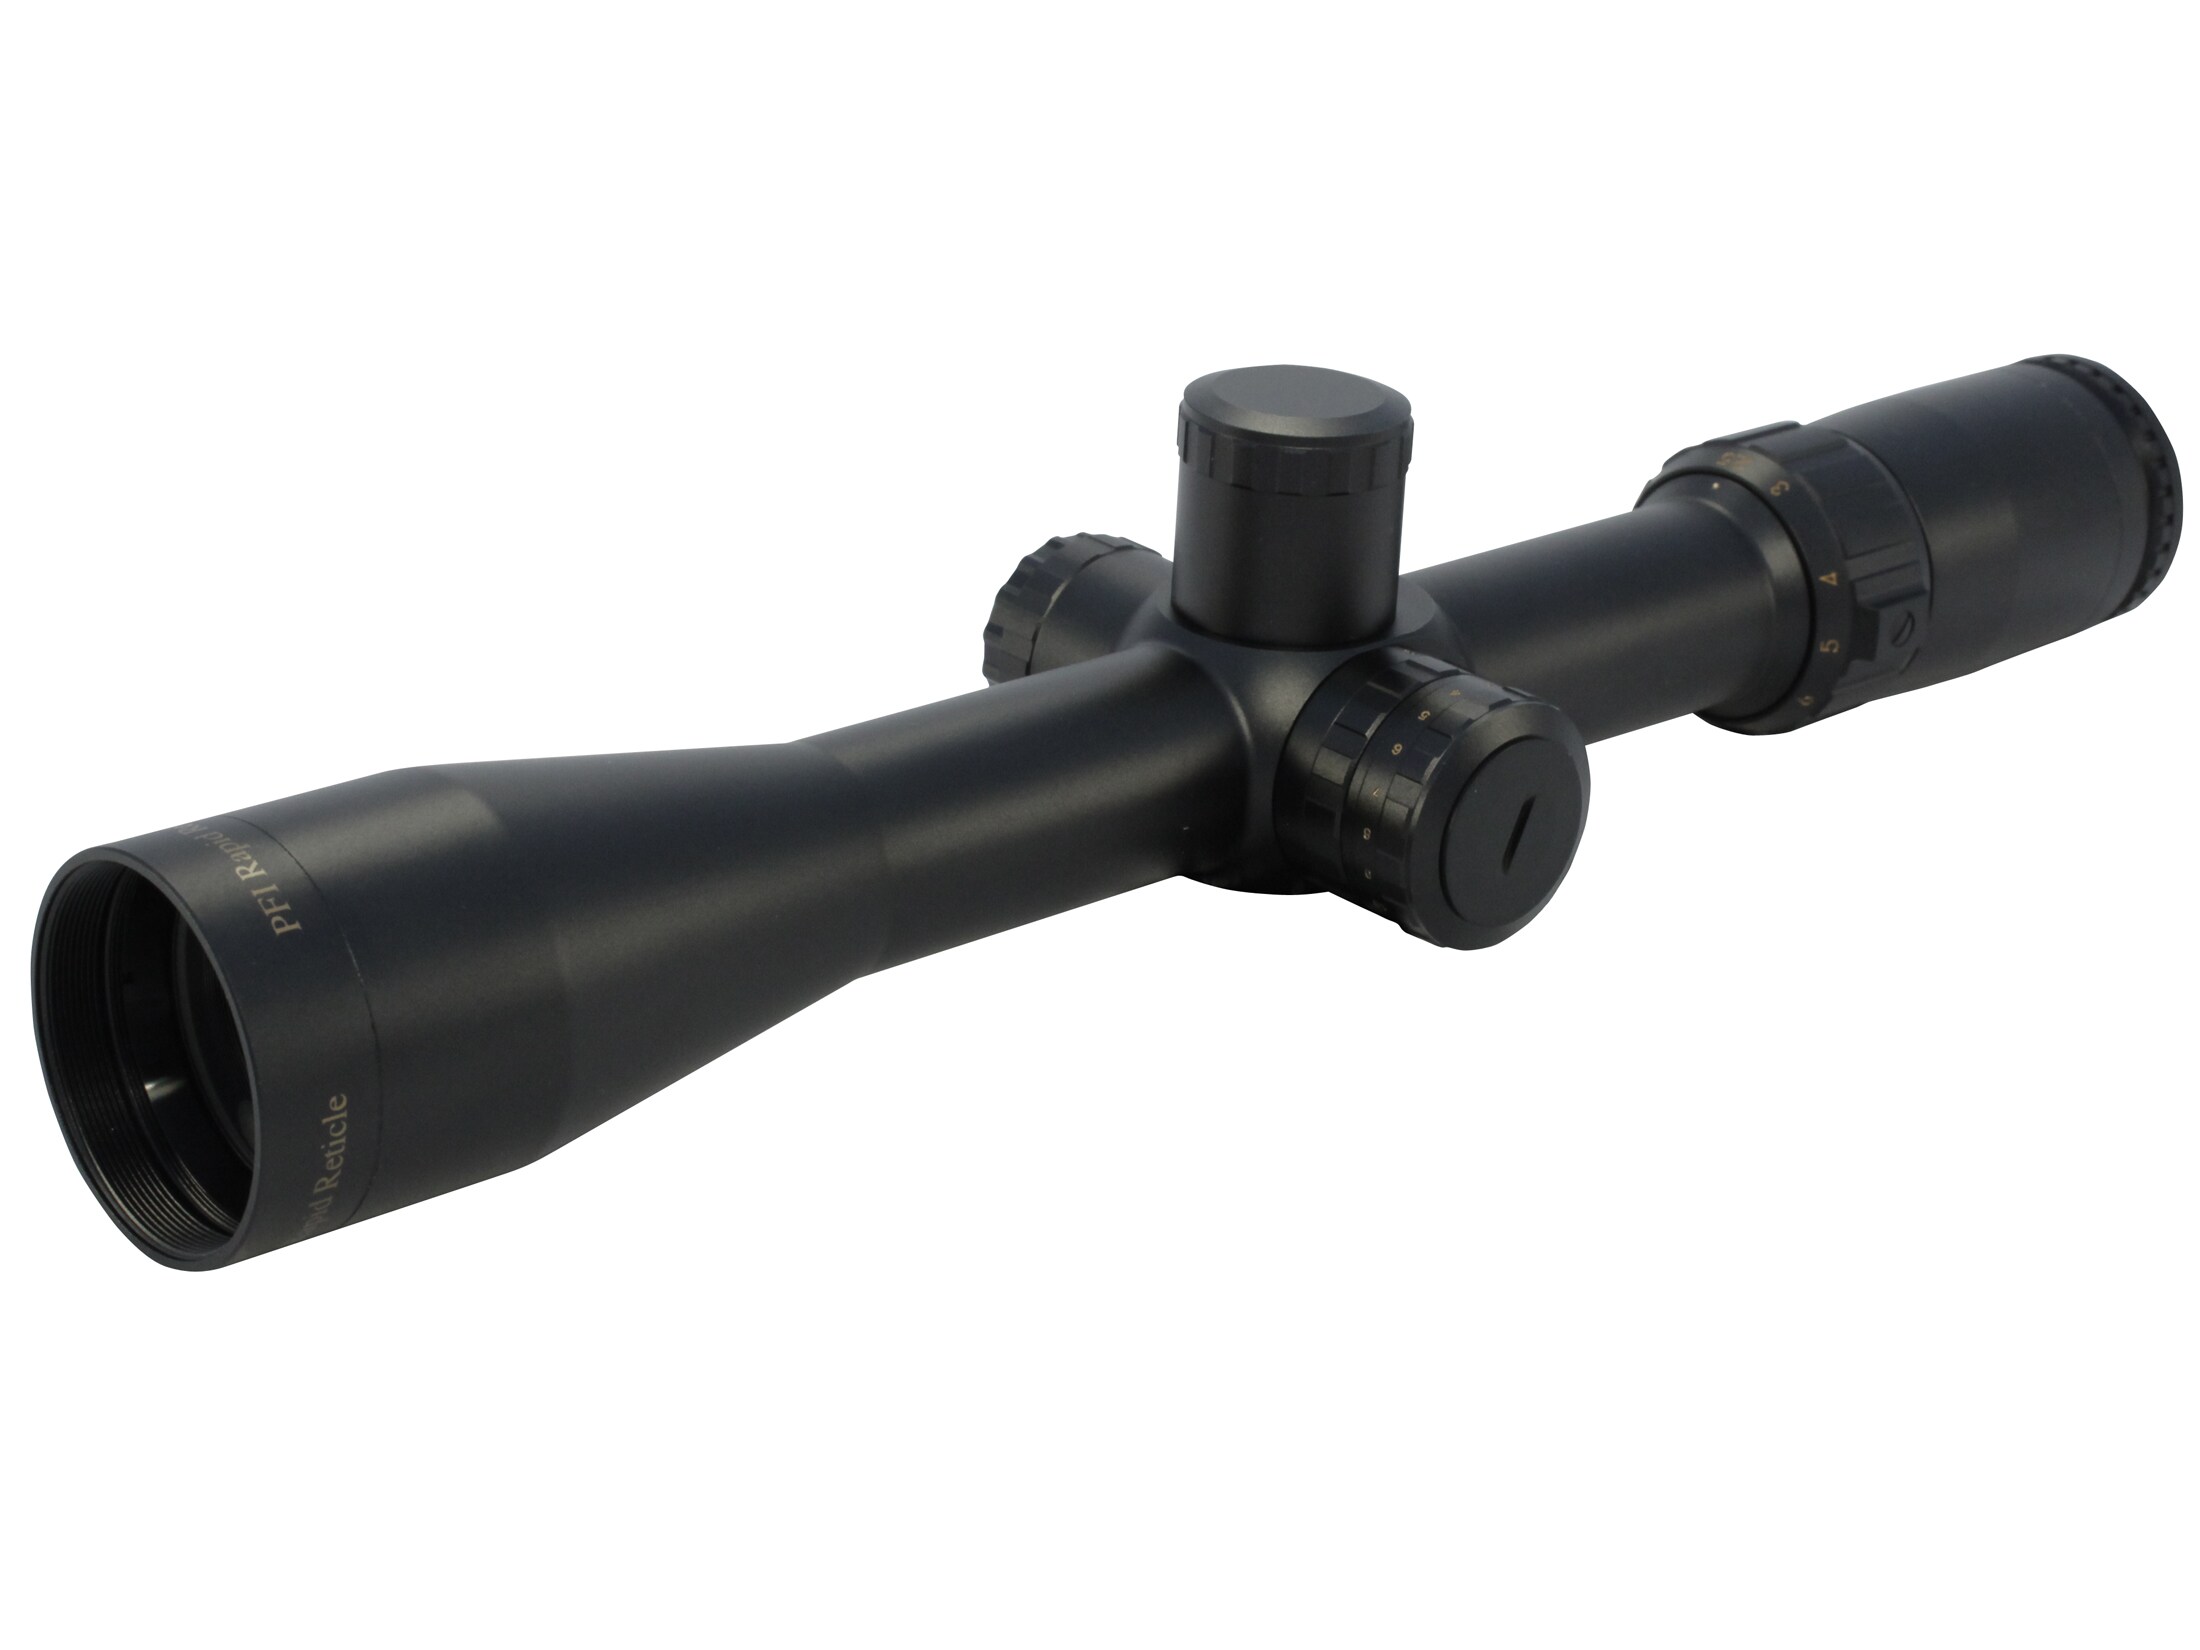 Pride Fowler Rapid Reticle 900 4 Tactical Rifle Scope 30mm Tube